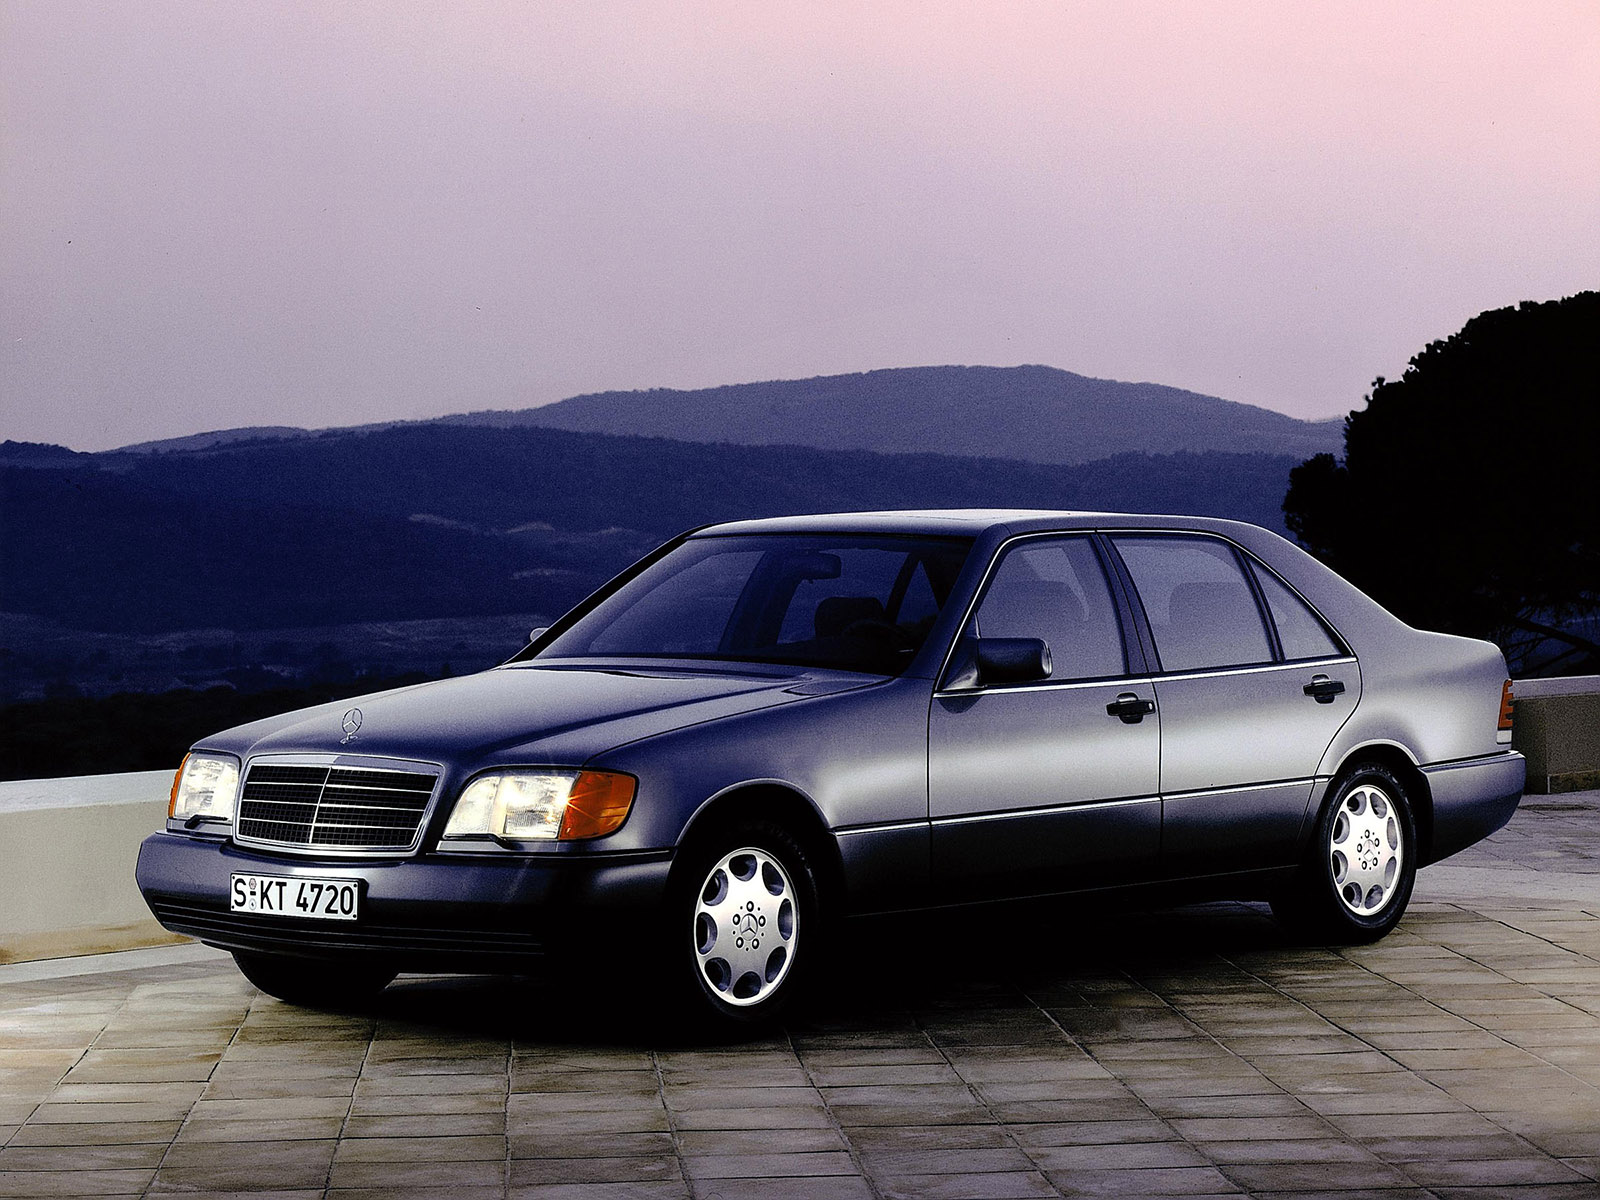 Mercedes Benz S Class W140 Picture Photo